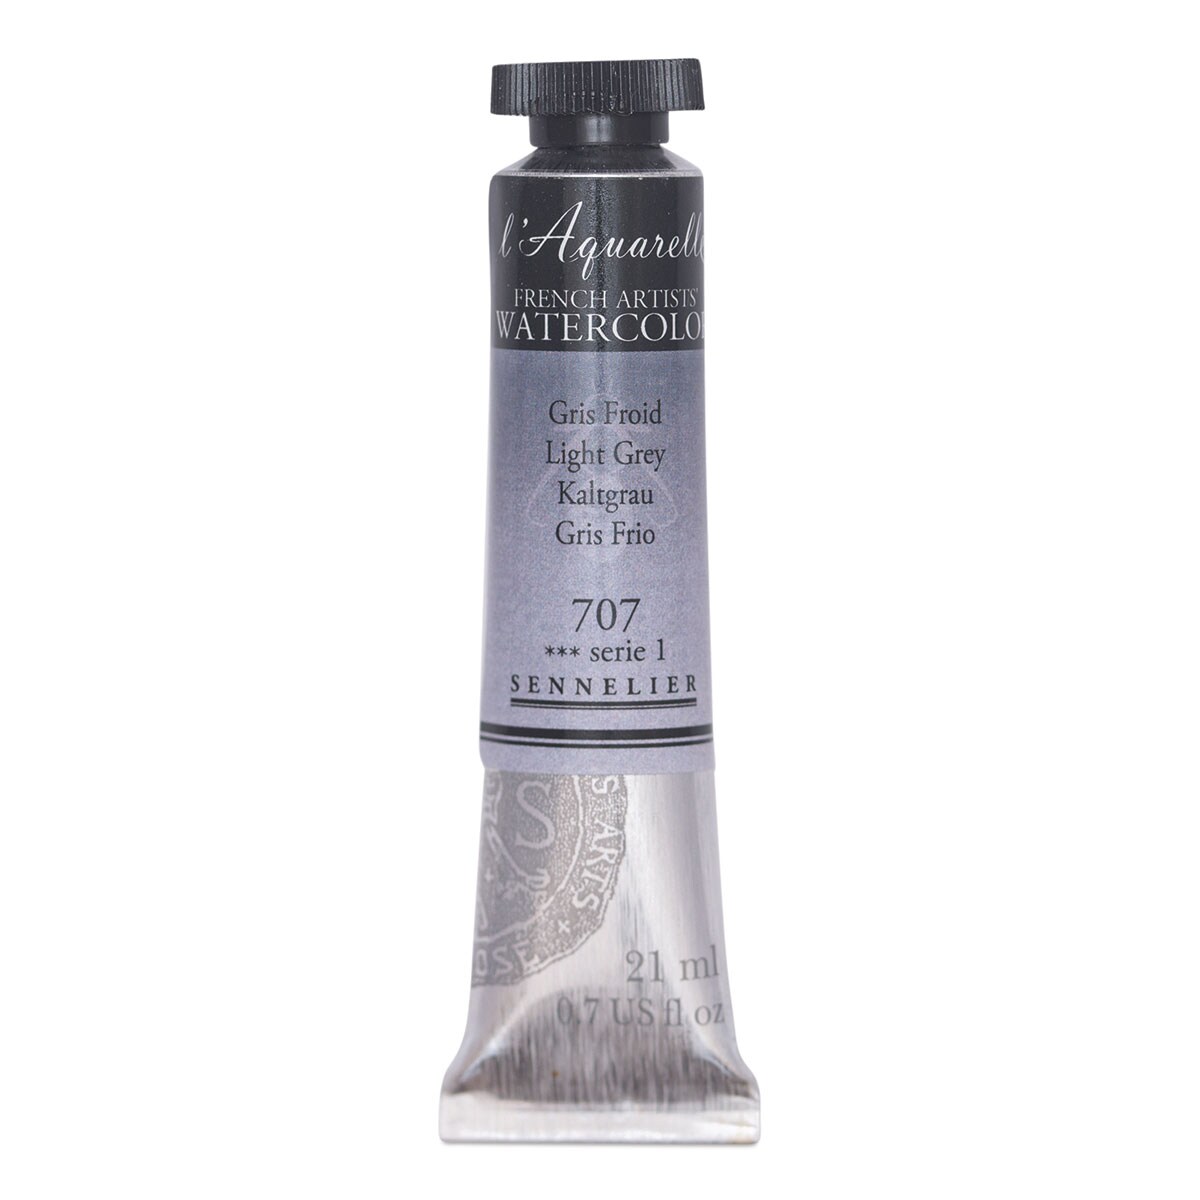 Sennelier French Artists&#x27; Watercolor - Light Grey, 21 ml, Tube